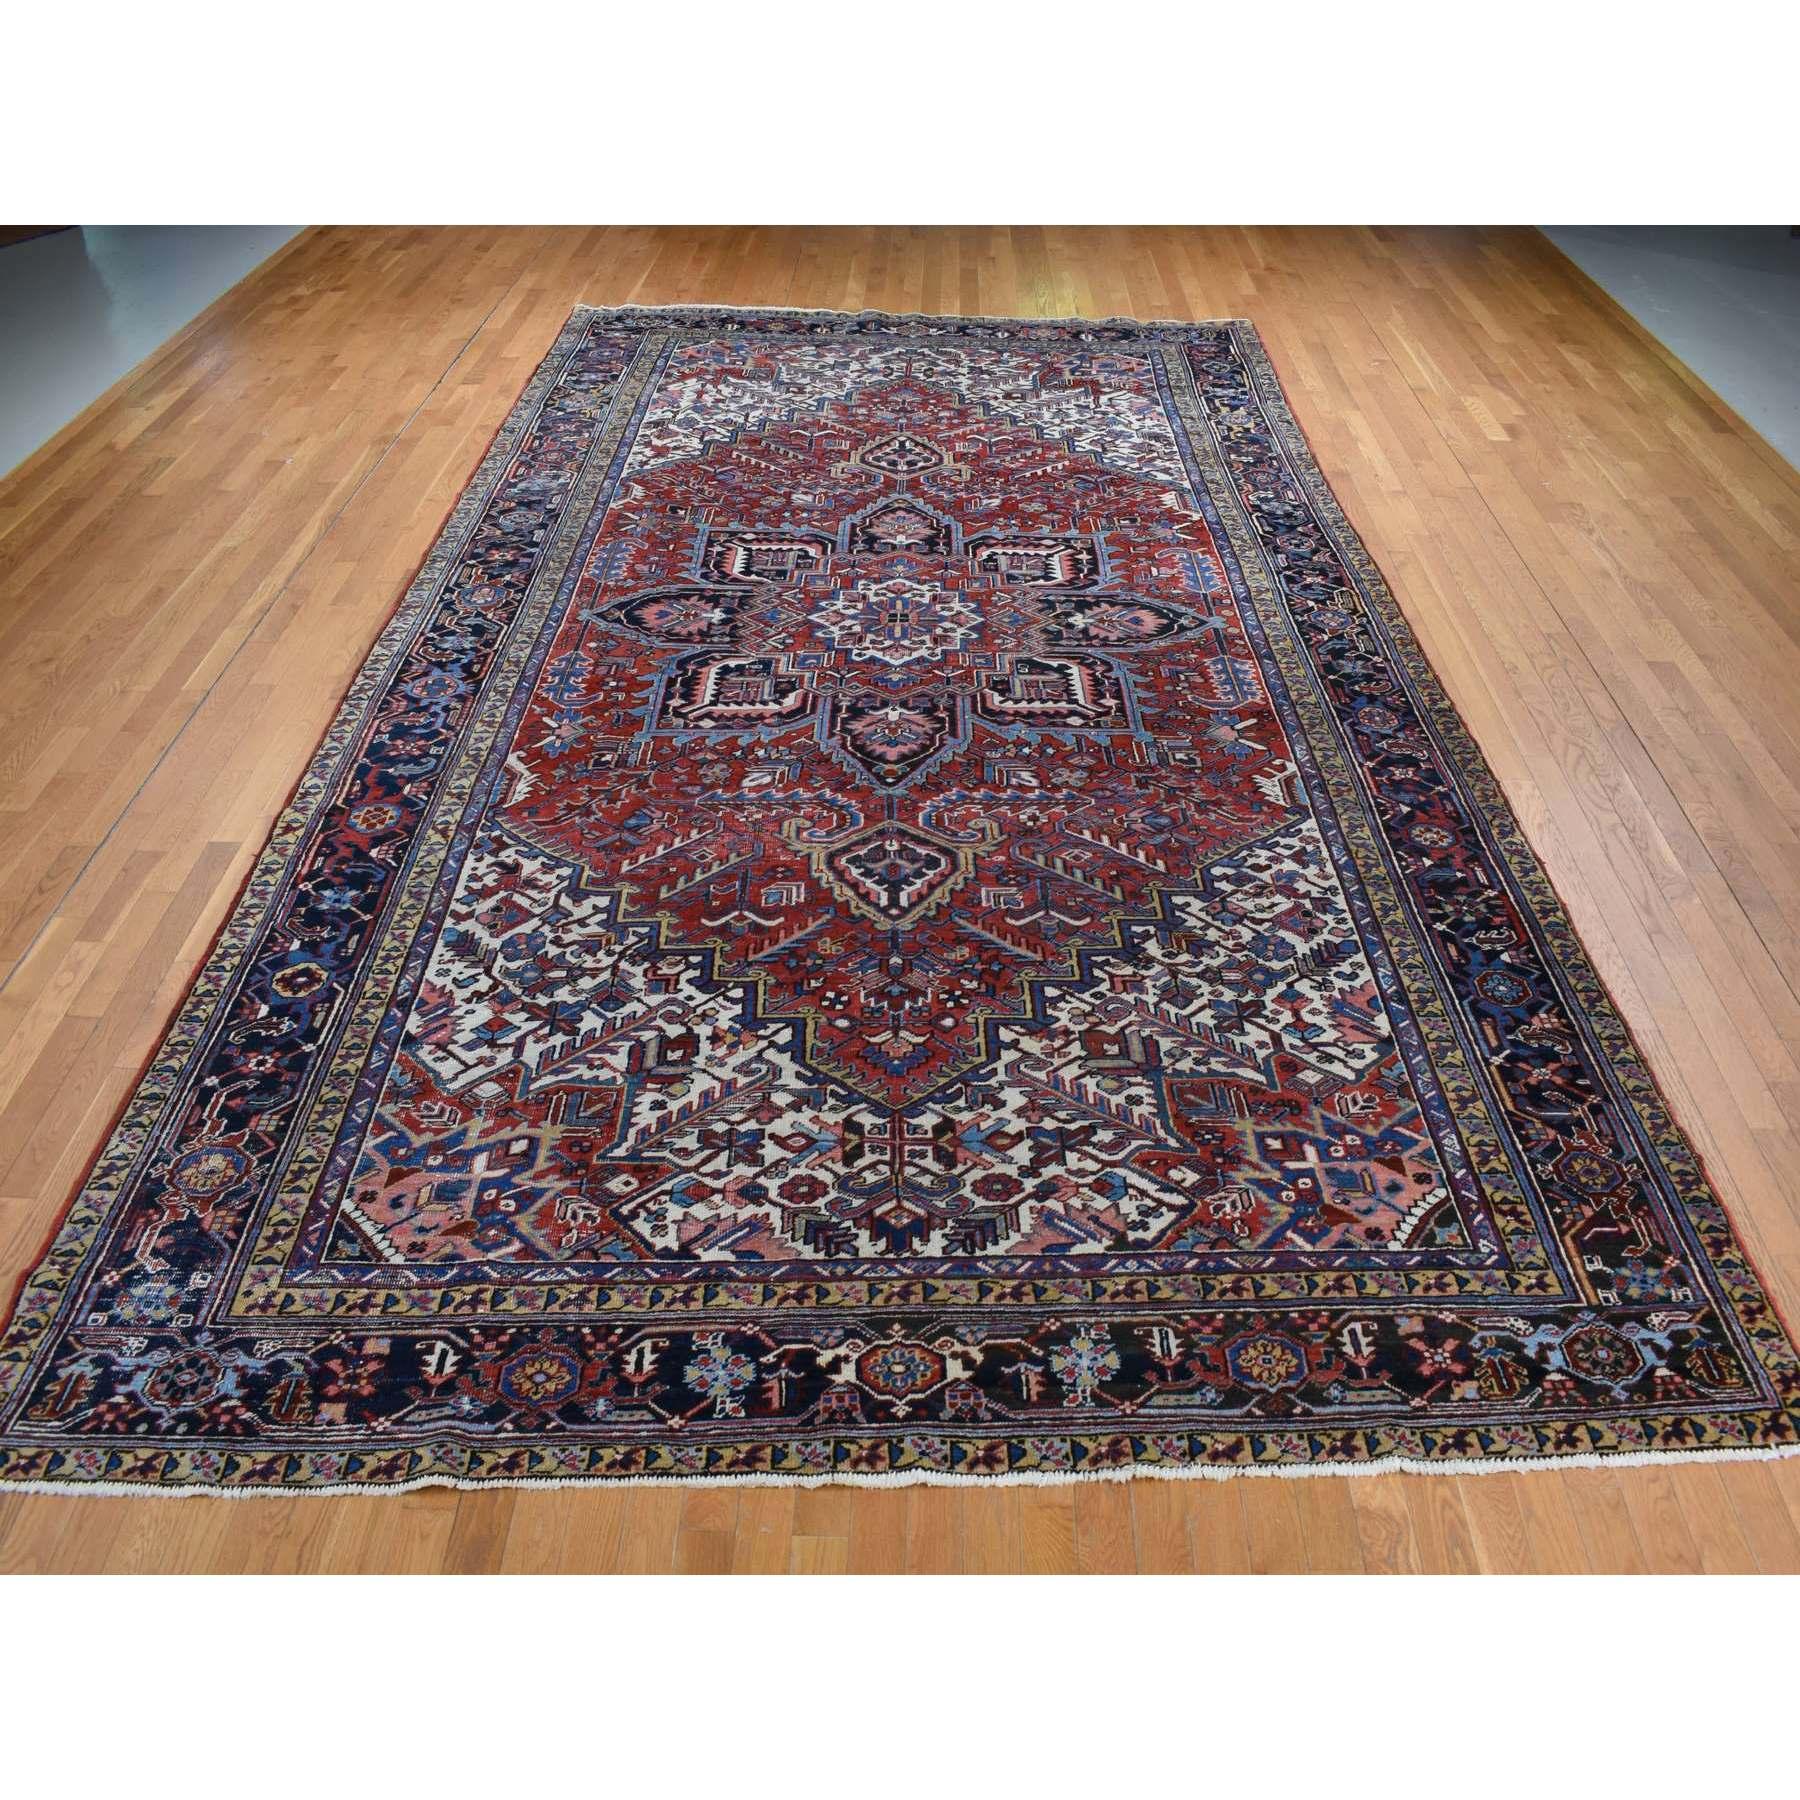 This fabulous Hand-Knotted carpet has been created and designed for extra strength and durability. This rug has been handcrafted for weeks in the traditional method that is used to make
Exact Rug Size in Feet and Inches : 9'7